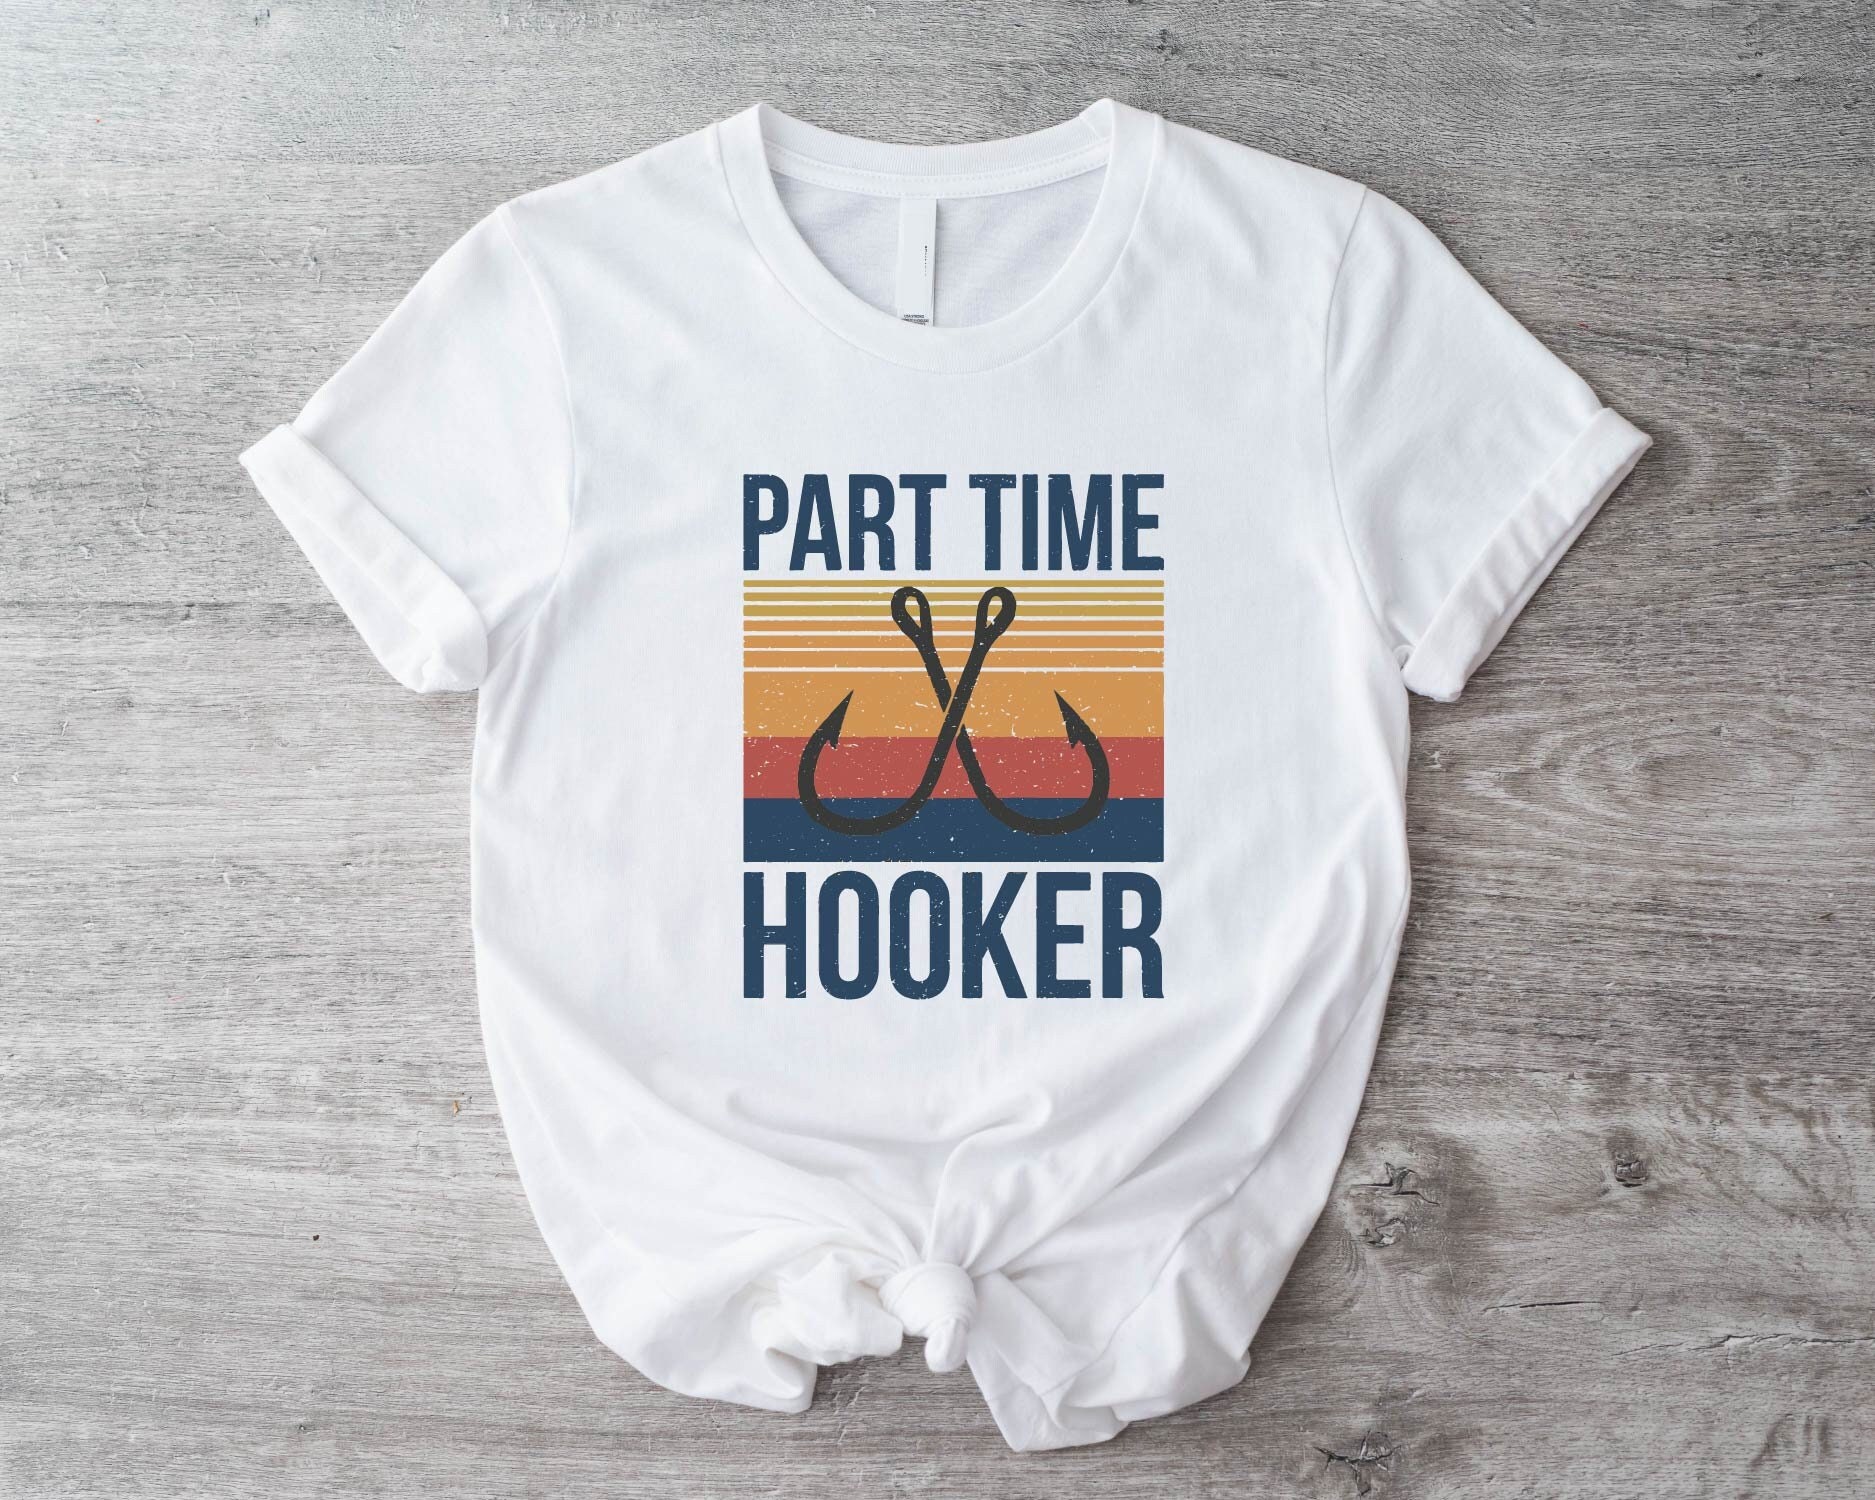  Fishing-Shirt Hooker on Weekends Funny Bass Dad Adult Humor  T-Shirt : Clothing, Shoes & Jewelry